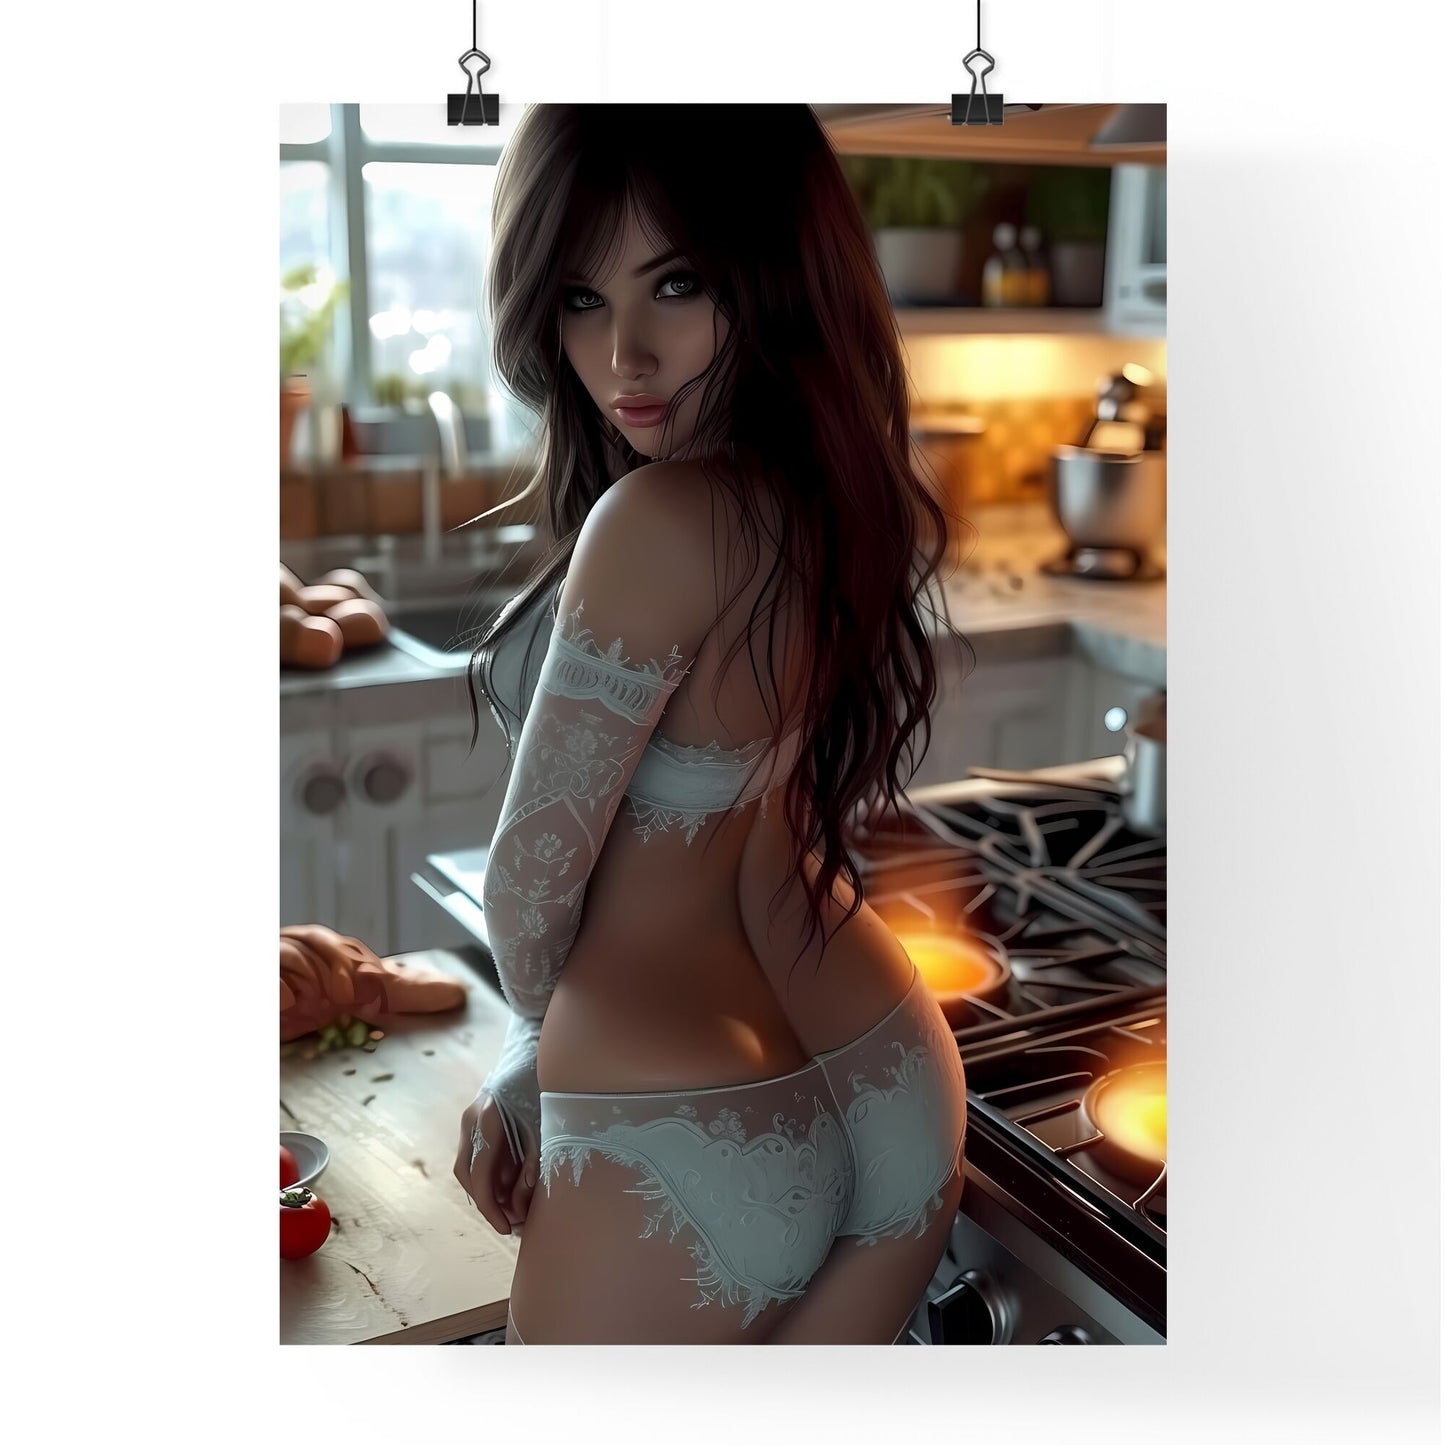 Housewife - Art print of a woman in a kitchen Default Title